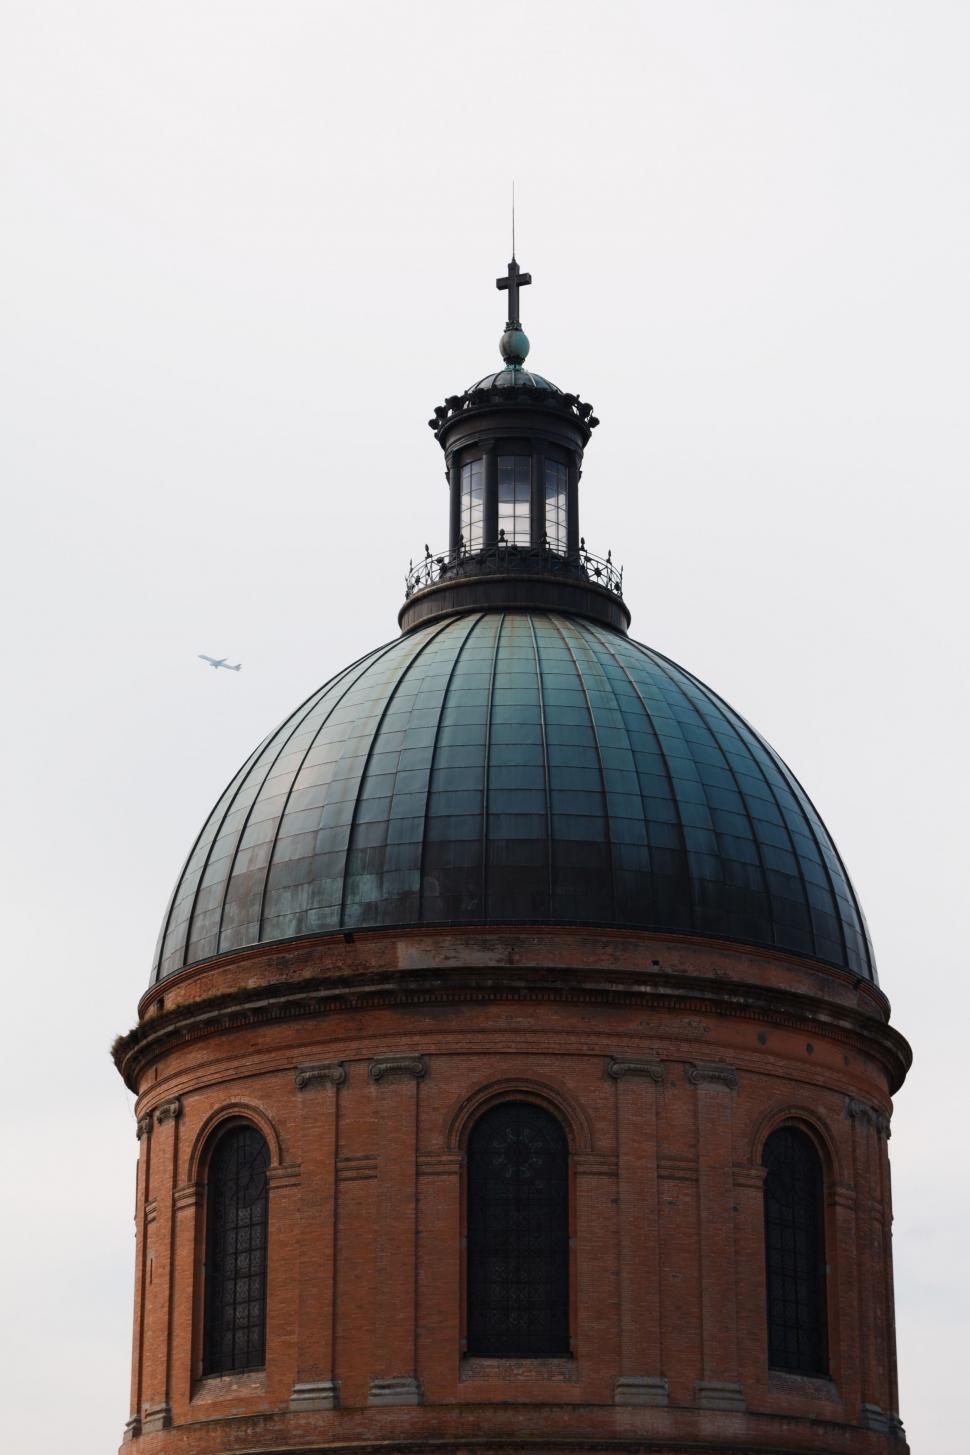 Free Image of Grand Dome With Cross on Top 